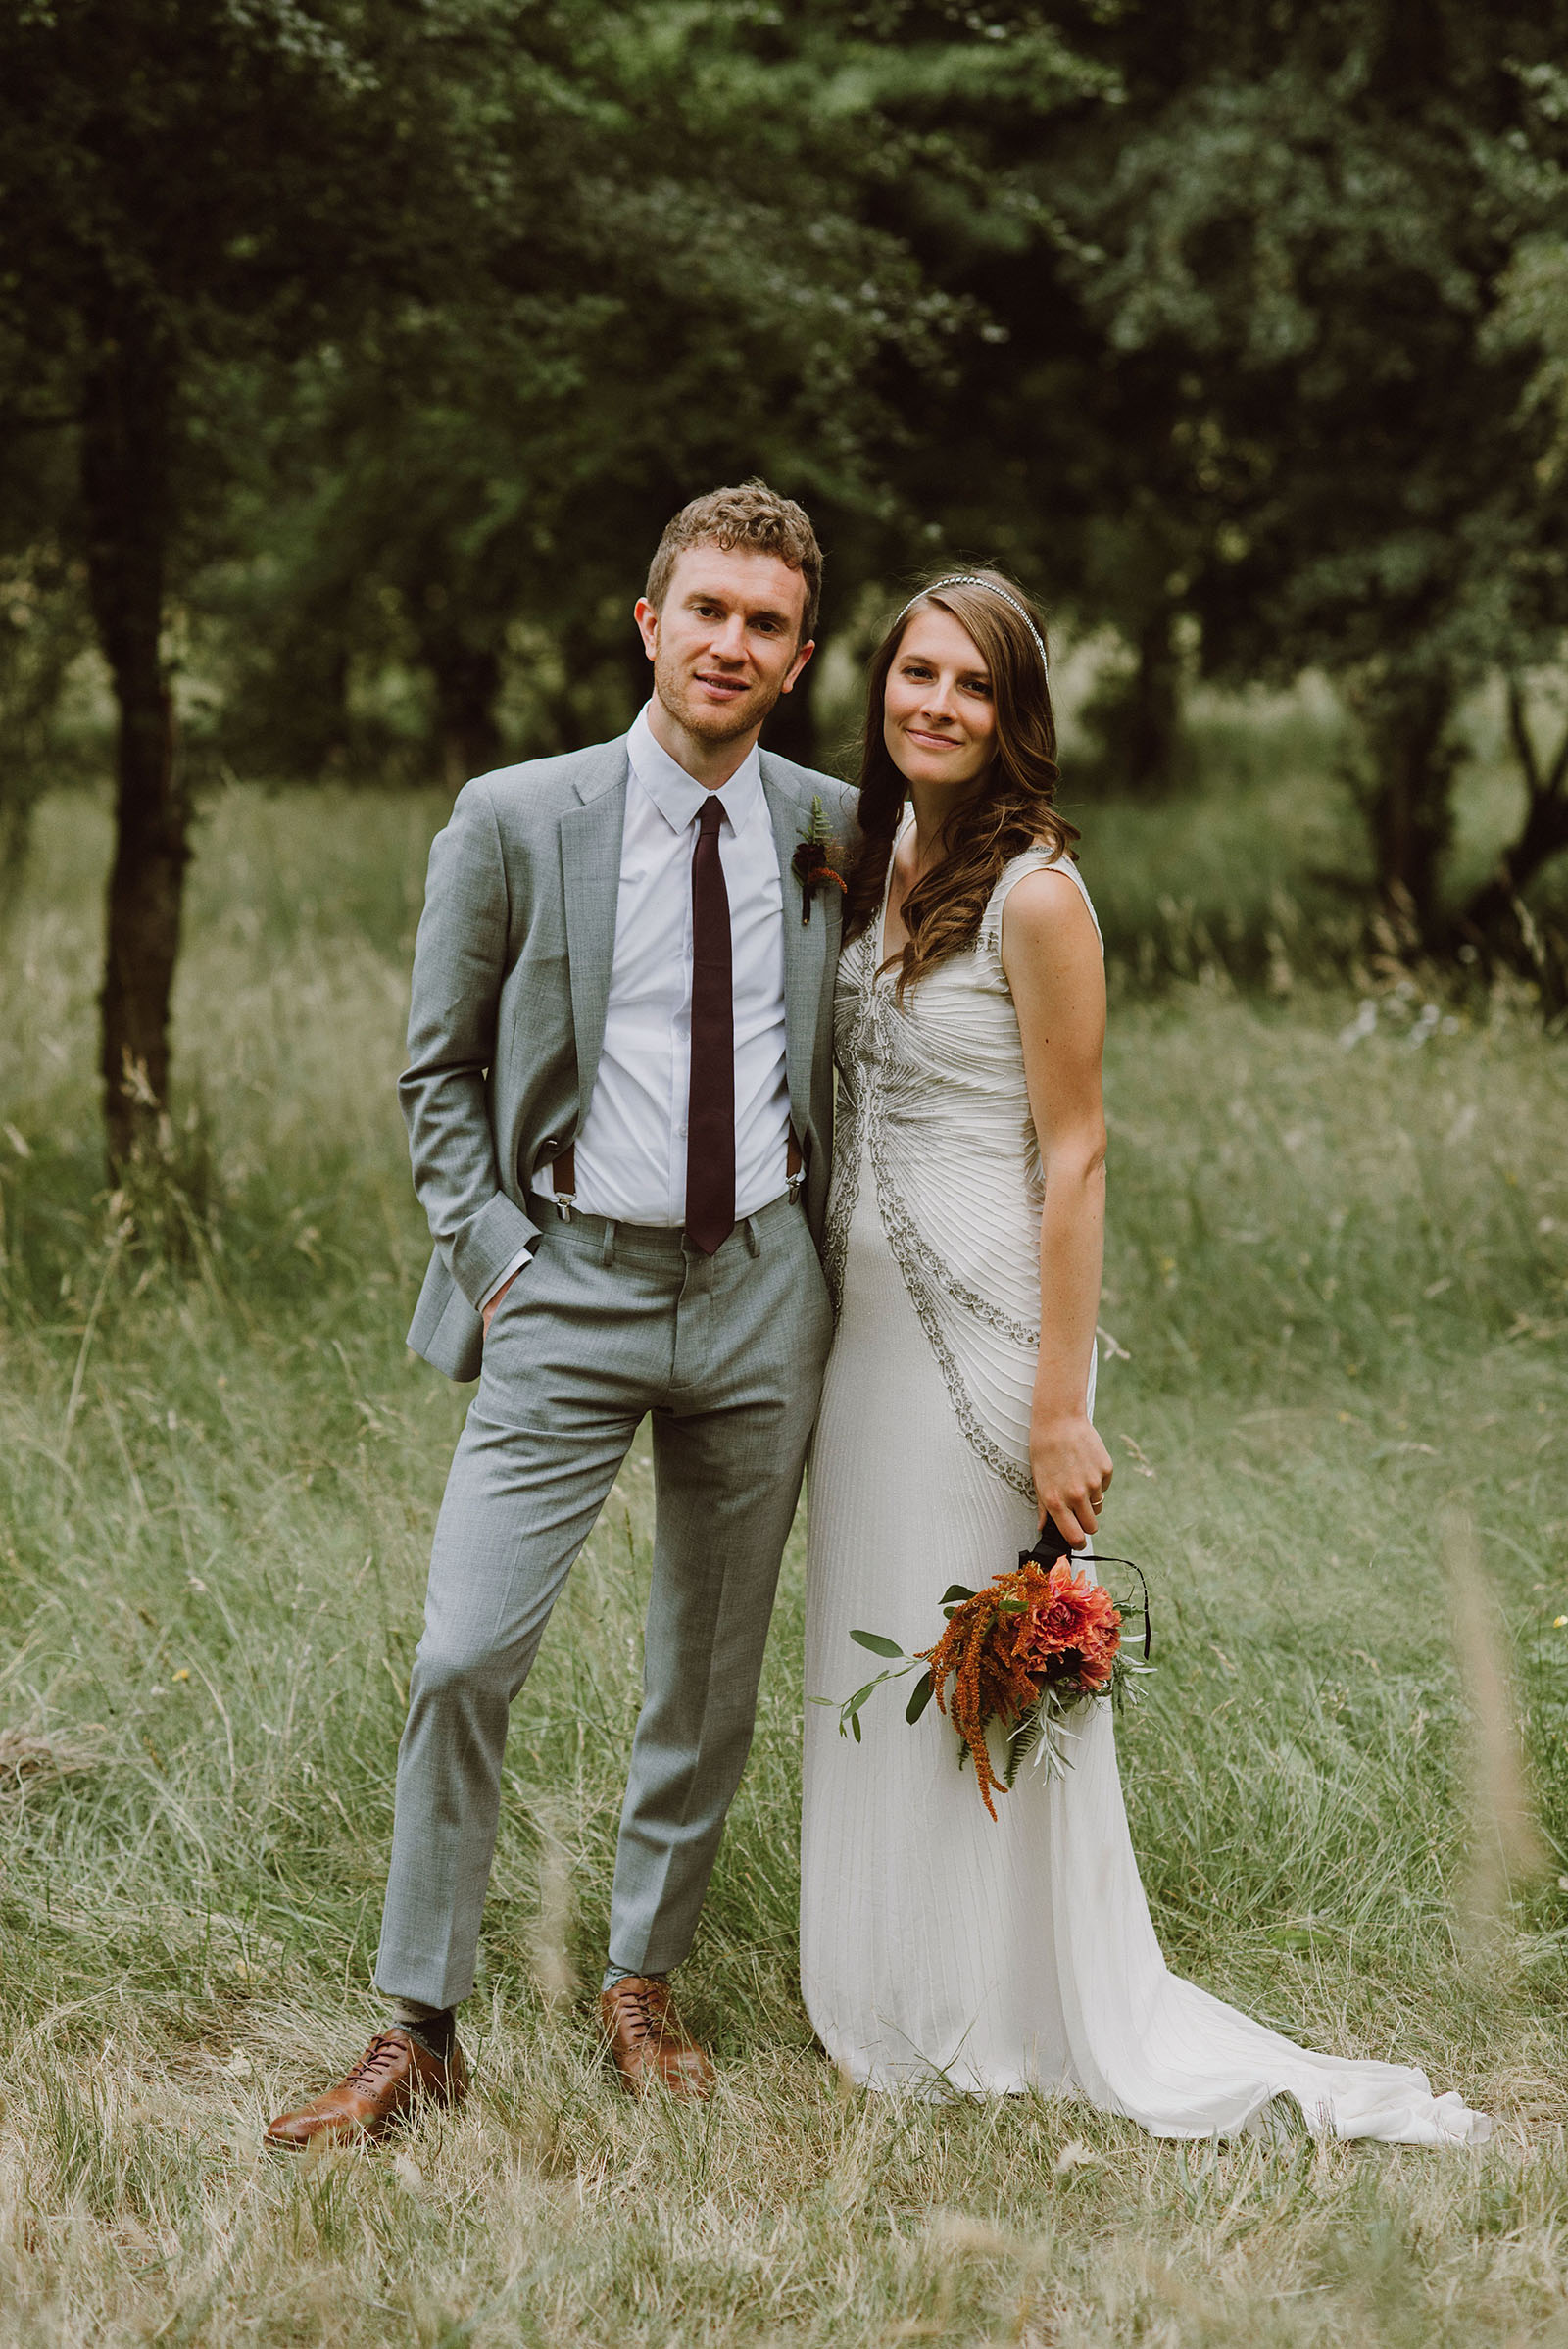 Bride and Groom portraits at Pendarvis Farm | Woodsy Campground Wedding